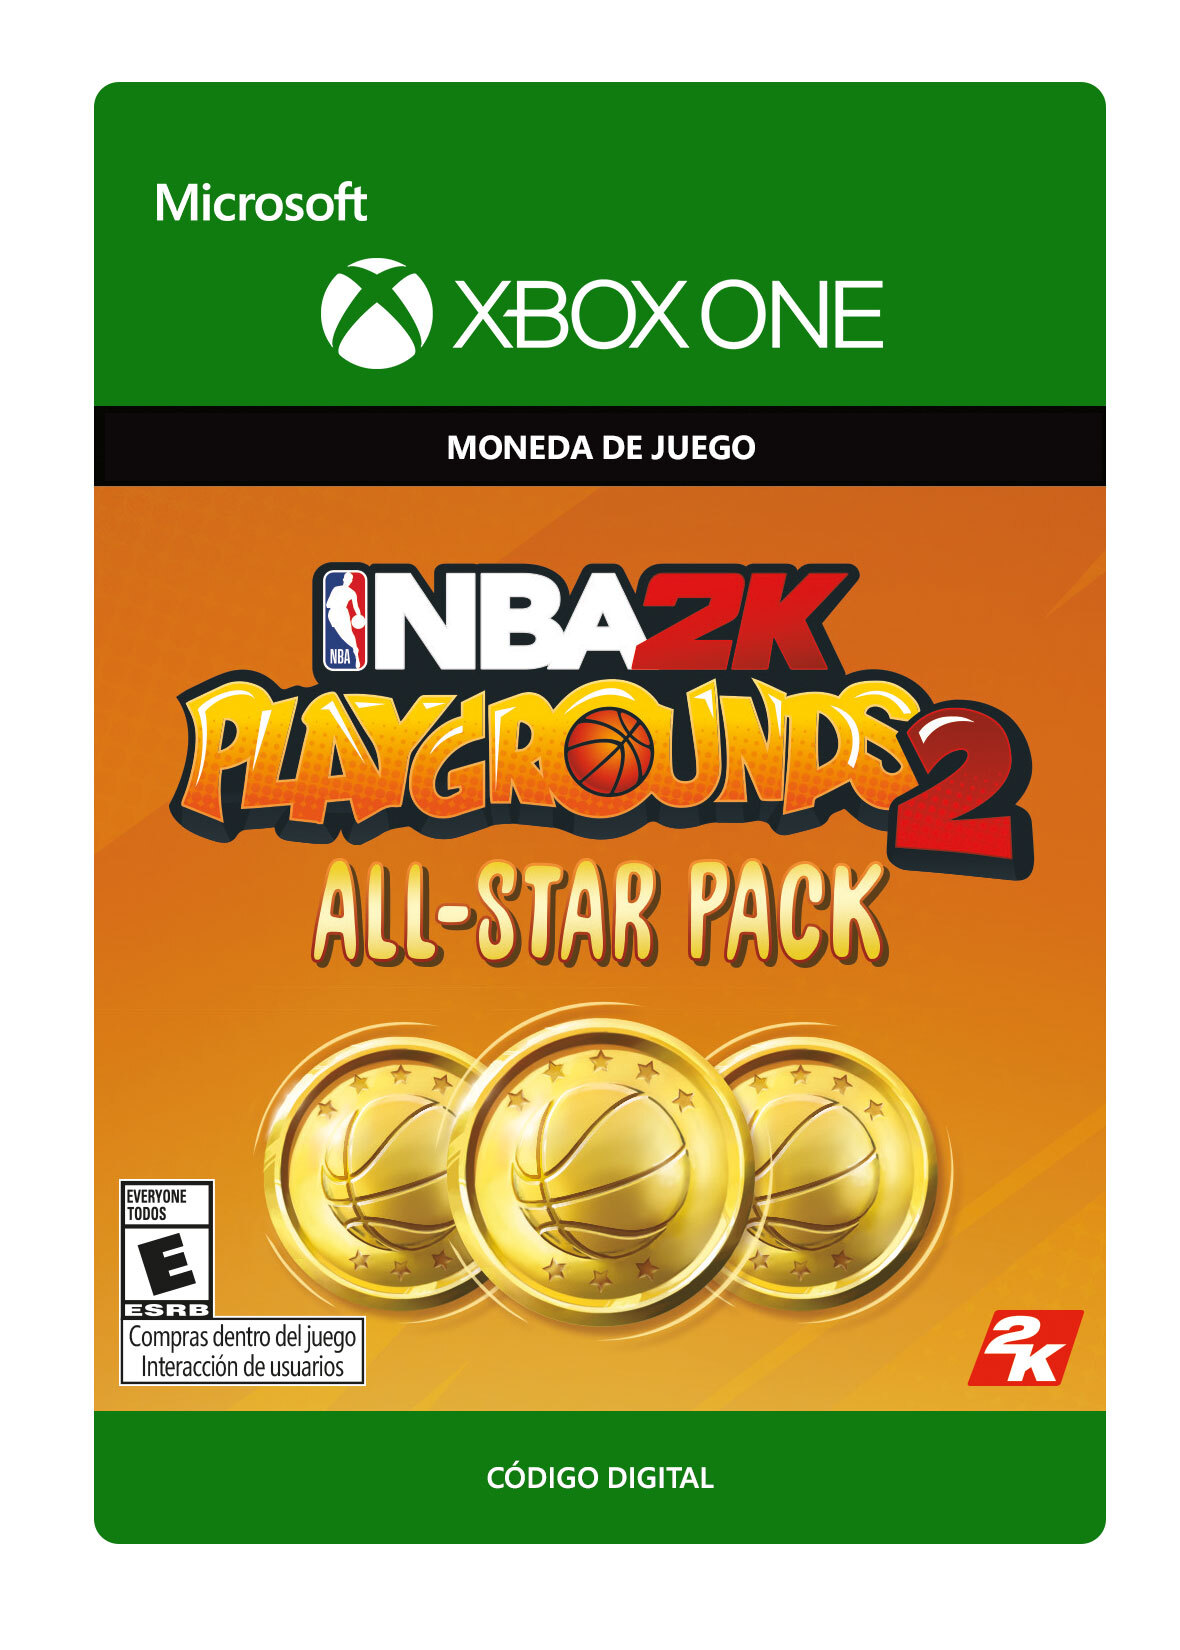 Microsoft - NBA 2K Playgrounds 2 All-Star Pack – 16,000 VC - Poducto Digital - Descargable